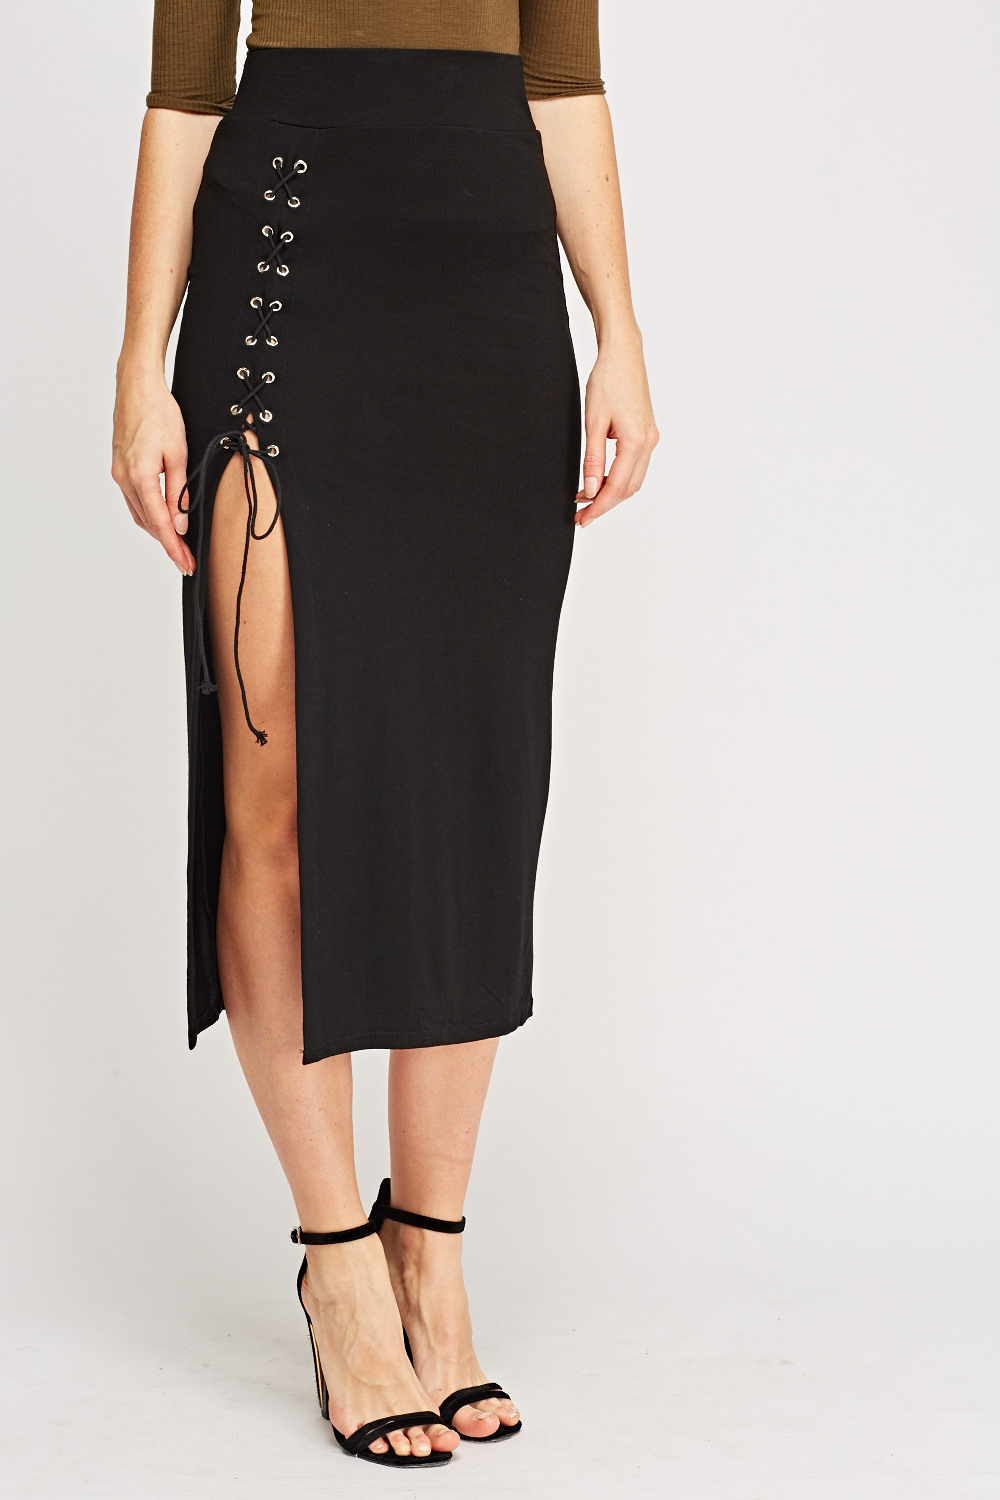 Lace Up Side Midi Skirt - Just $7